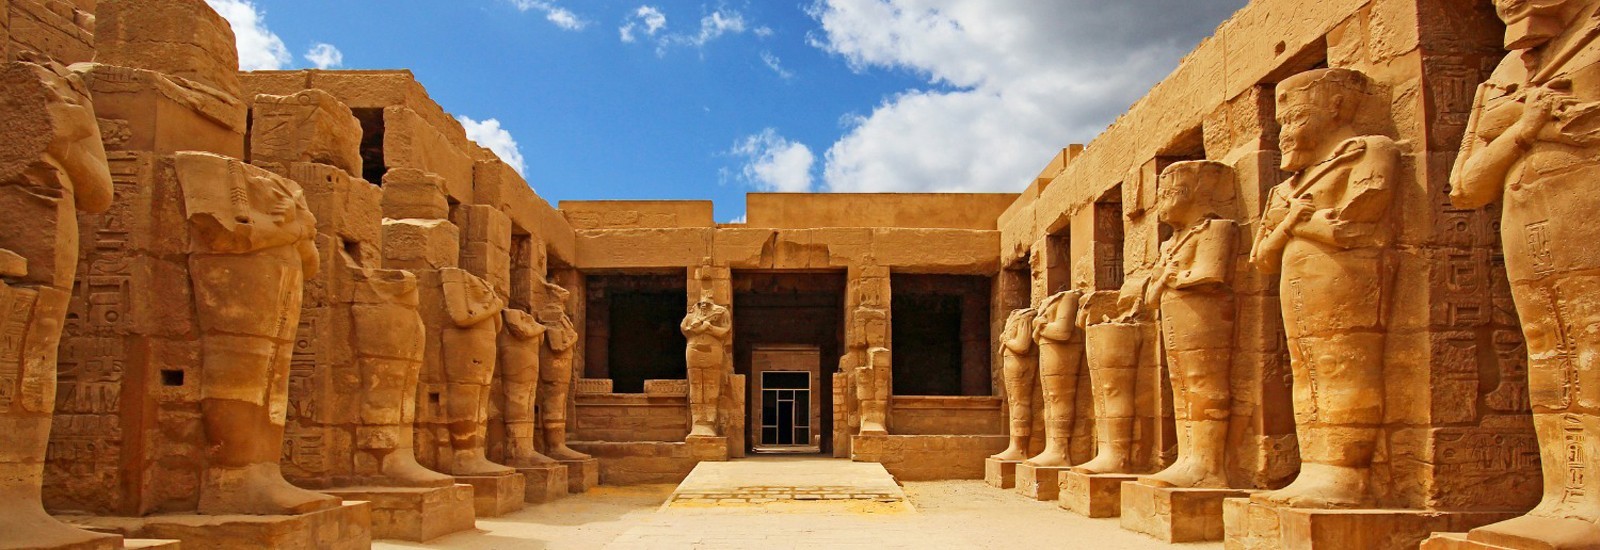 Luxor Top Sites from Aswan by Bus